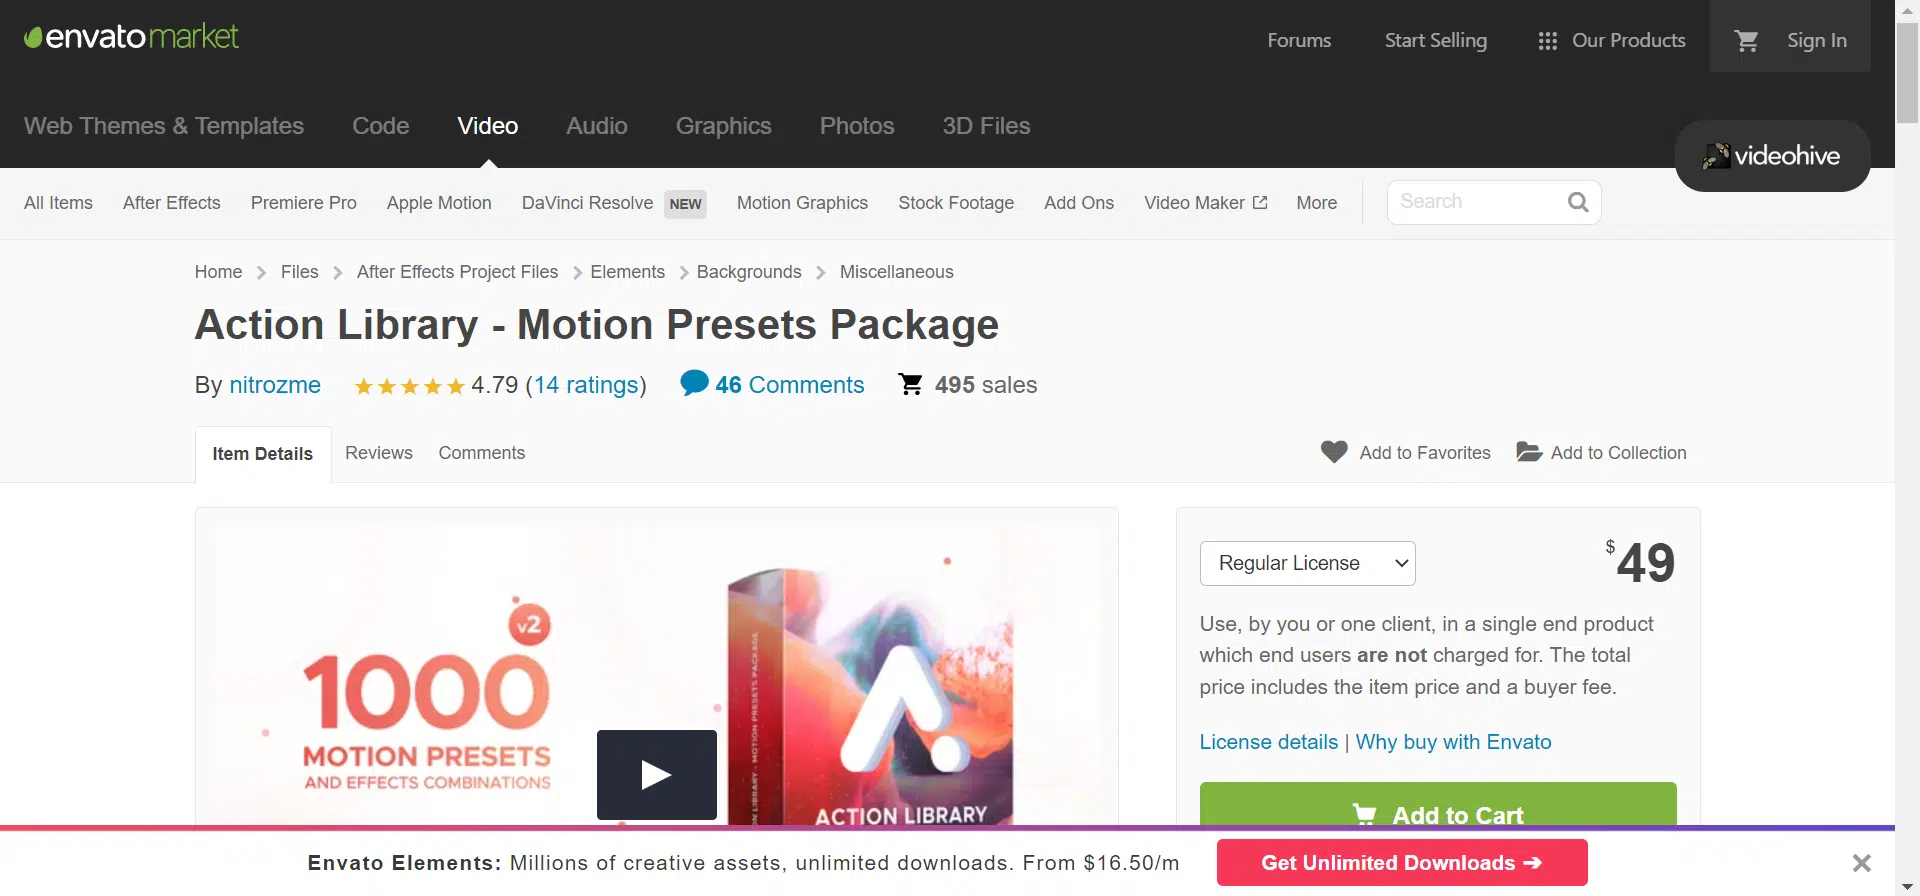 Action Library - Motion Presets Package